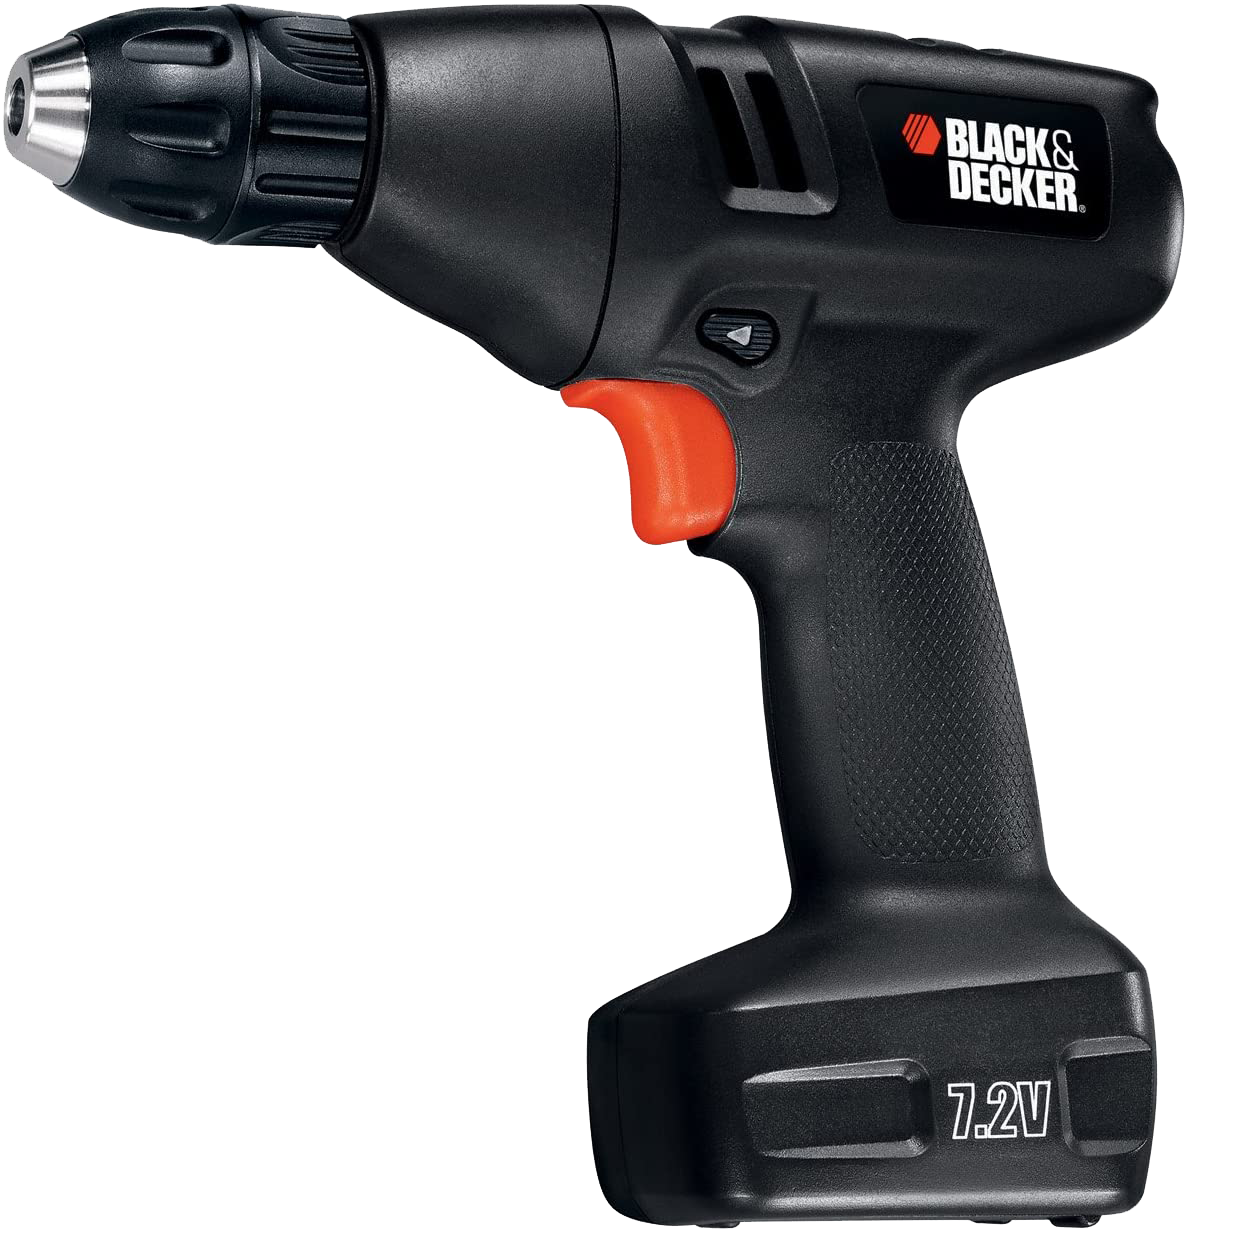 Black and Decker 7.2v drill with charger, no batteries. Tape and